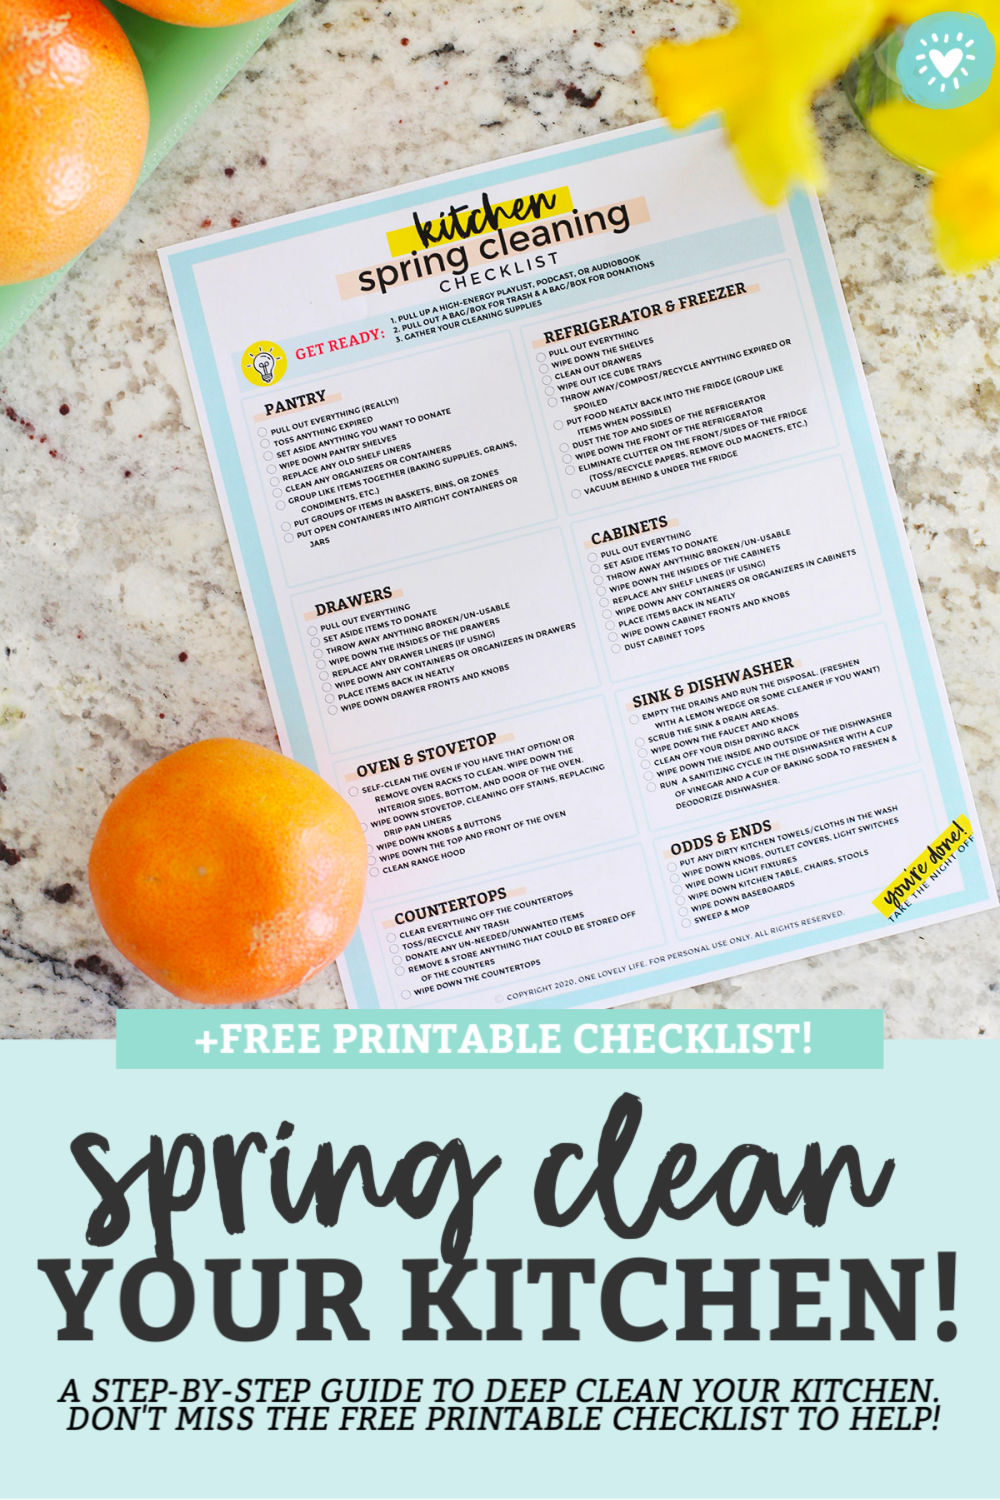 How to Deep-Clean Your Kitchen. A step-by-step checklist to clean your kitchen! Perfect for spring cleaning! // Kitchen Cleaning Tips // Spring Cleaning // Kitchen Cleaning Checklist / spring clean the kitchen / kitchen deep cleaning checklist / how to clean the kitchen step by step